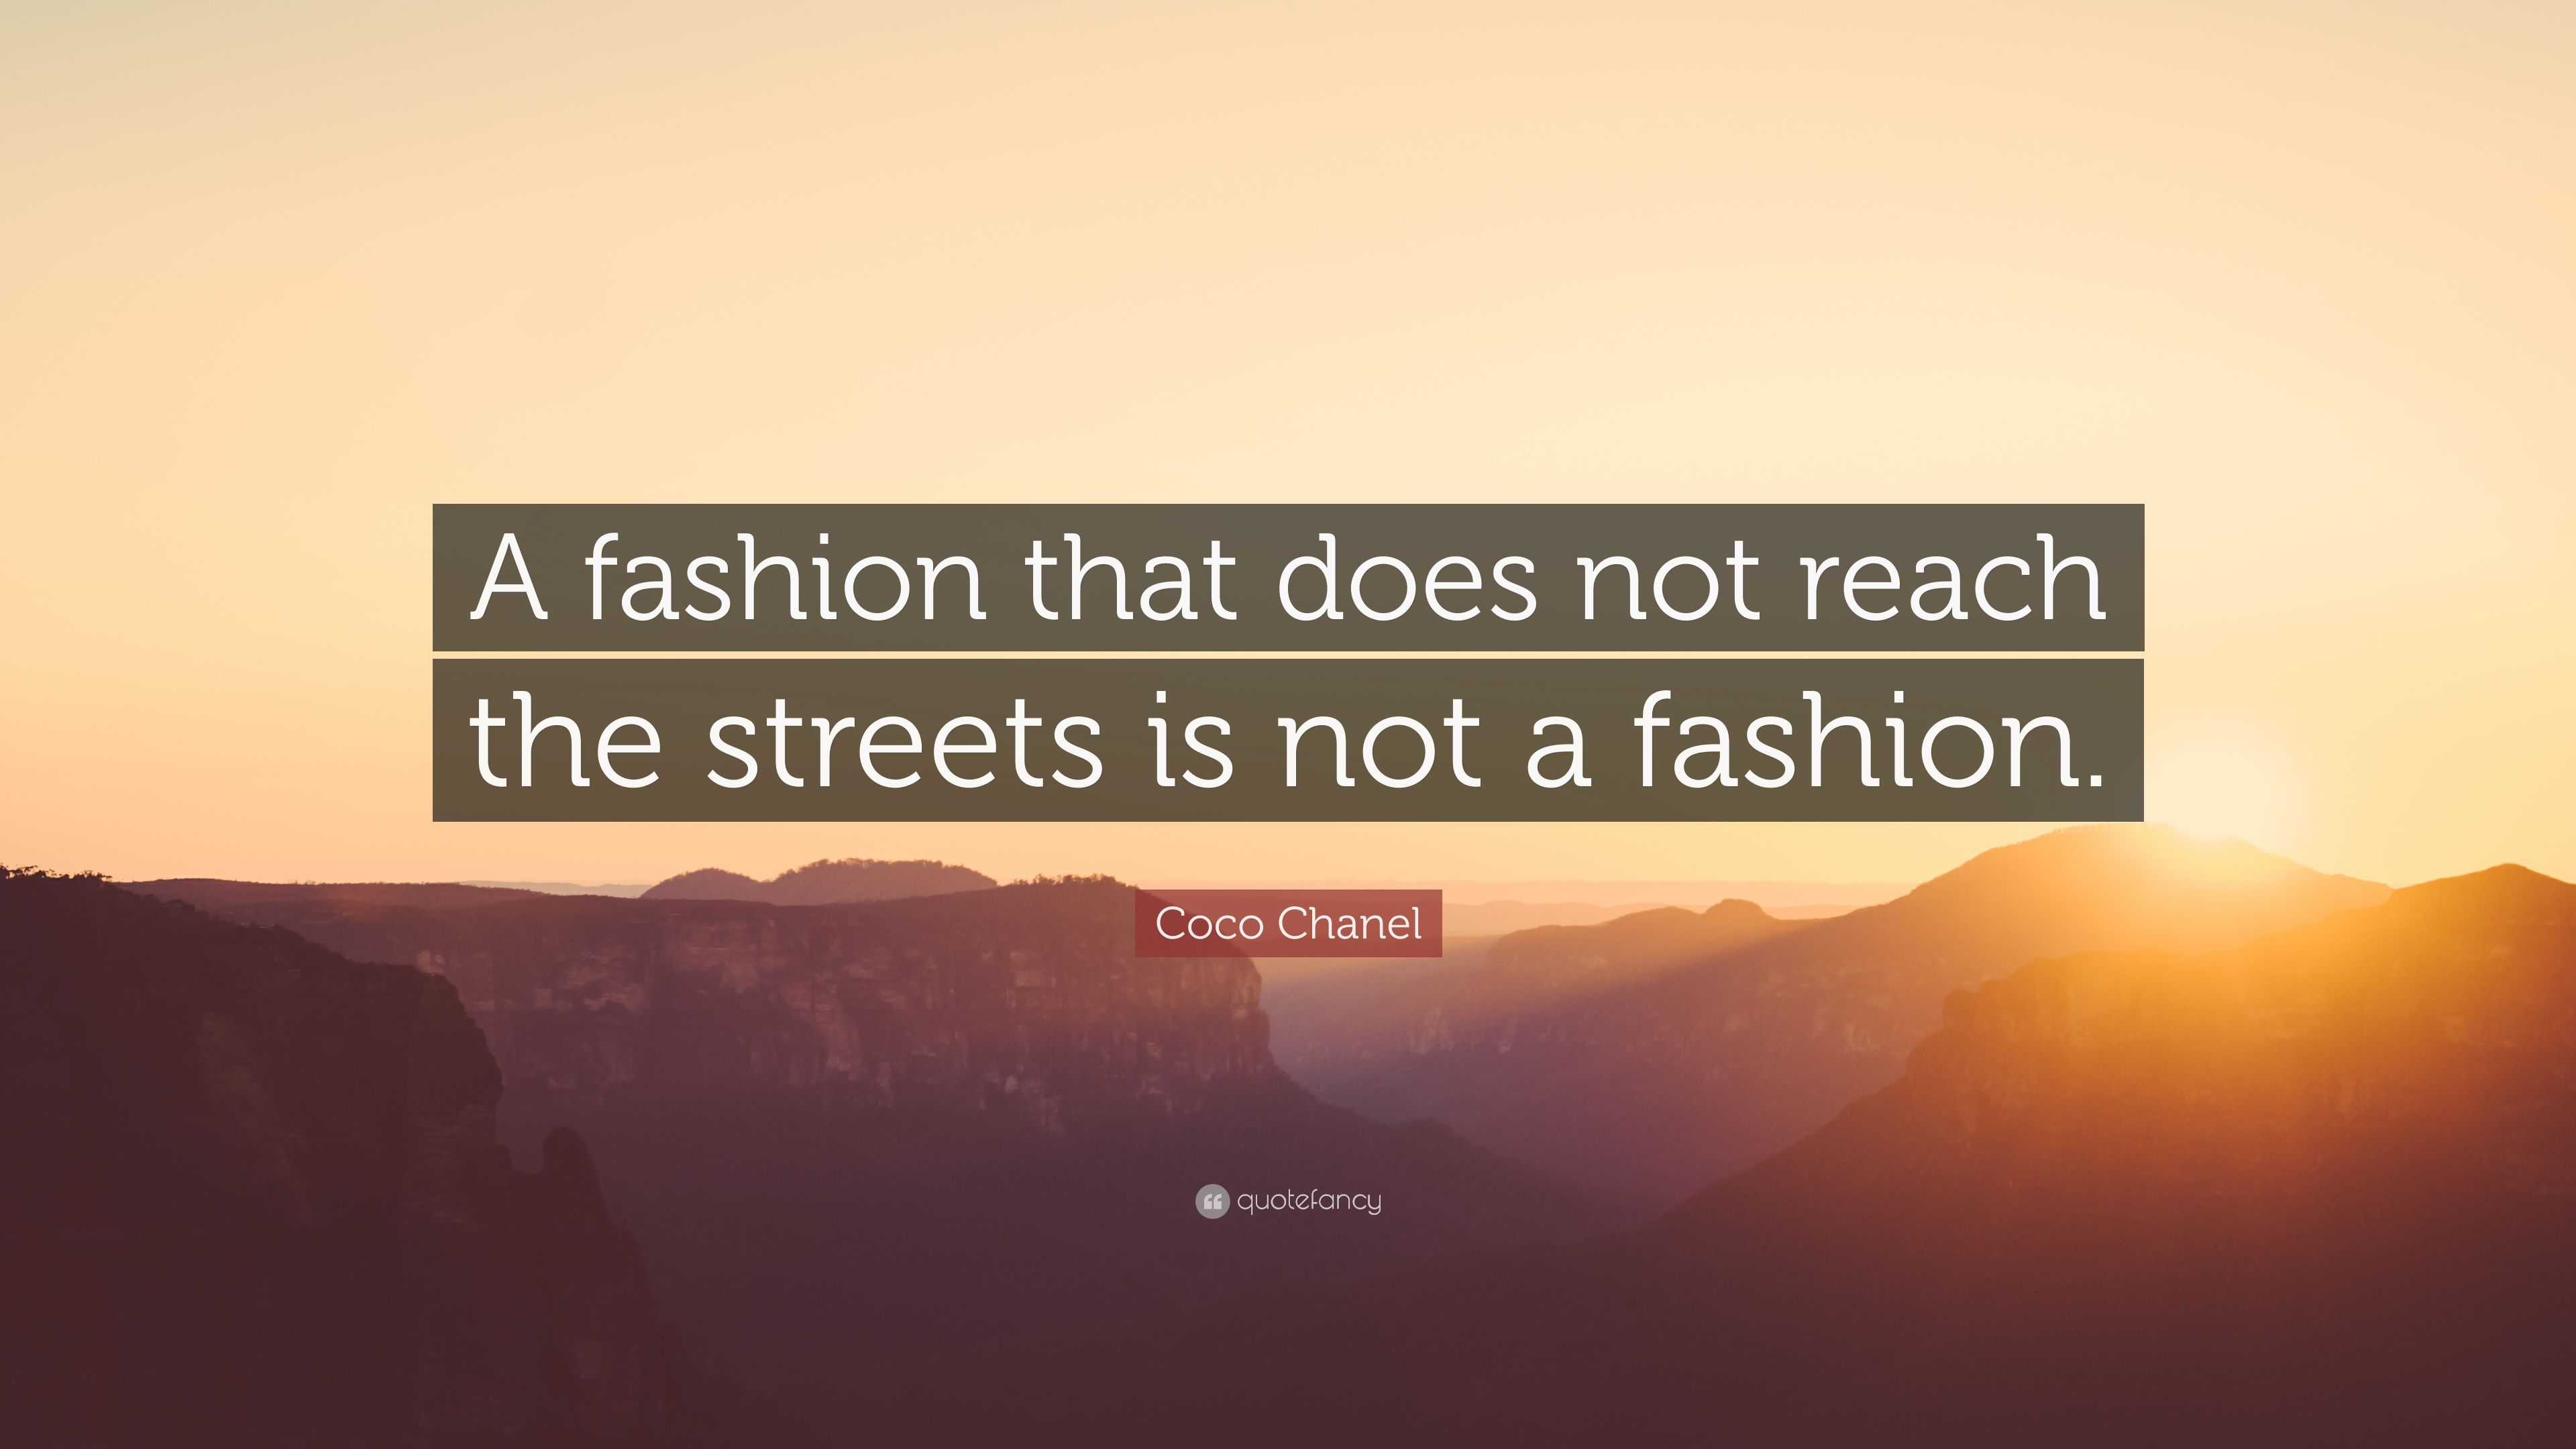 Coco Chanel Quote: “A fashion that does not reach the streets is not a  fashion.”